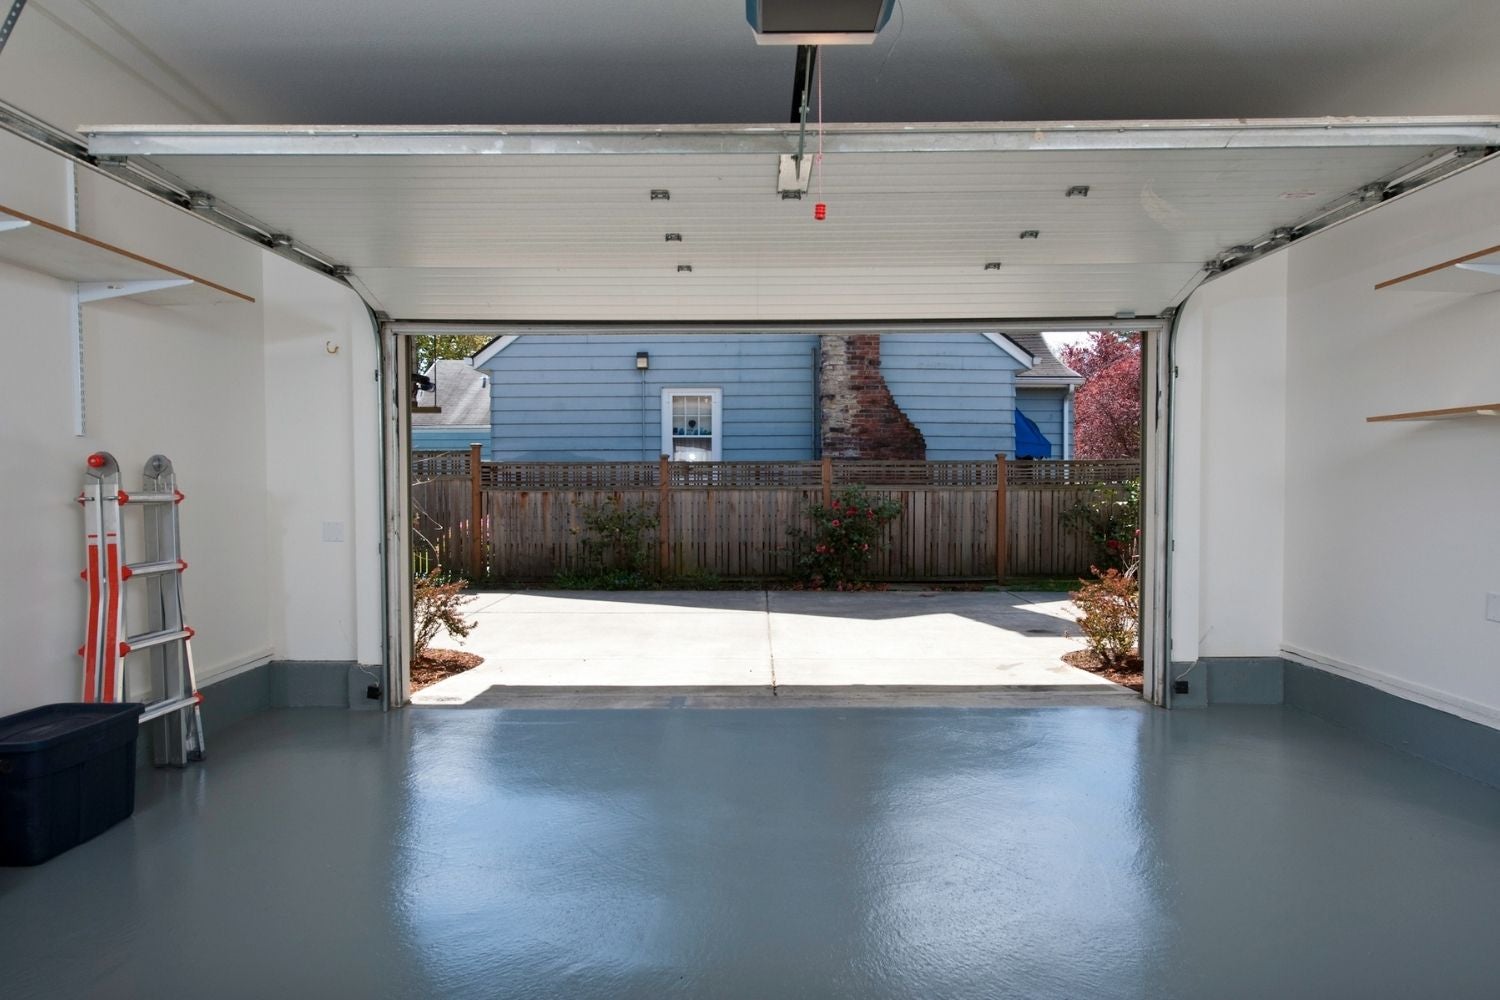 Automatic Garage Door Spring Replacement - A Guide to Replacing Garage Door Springs